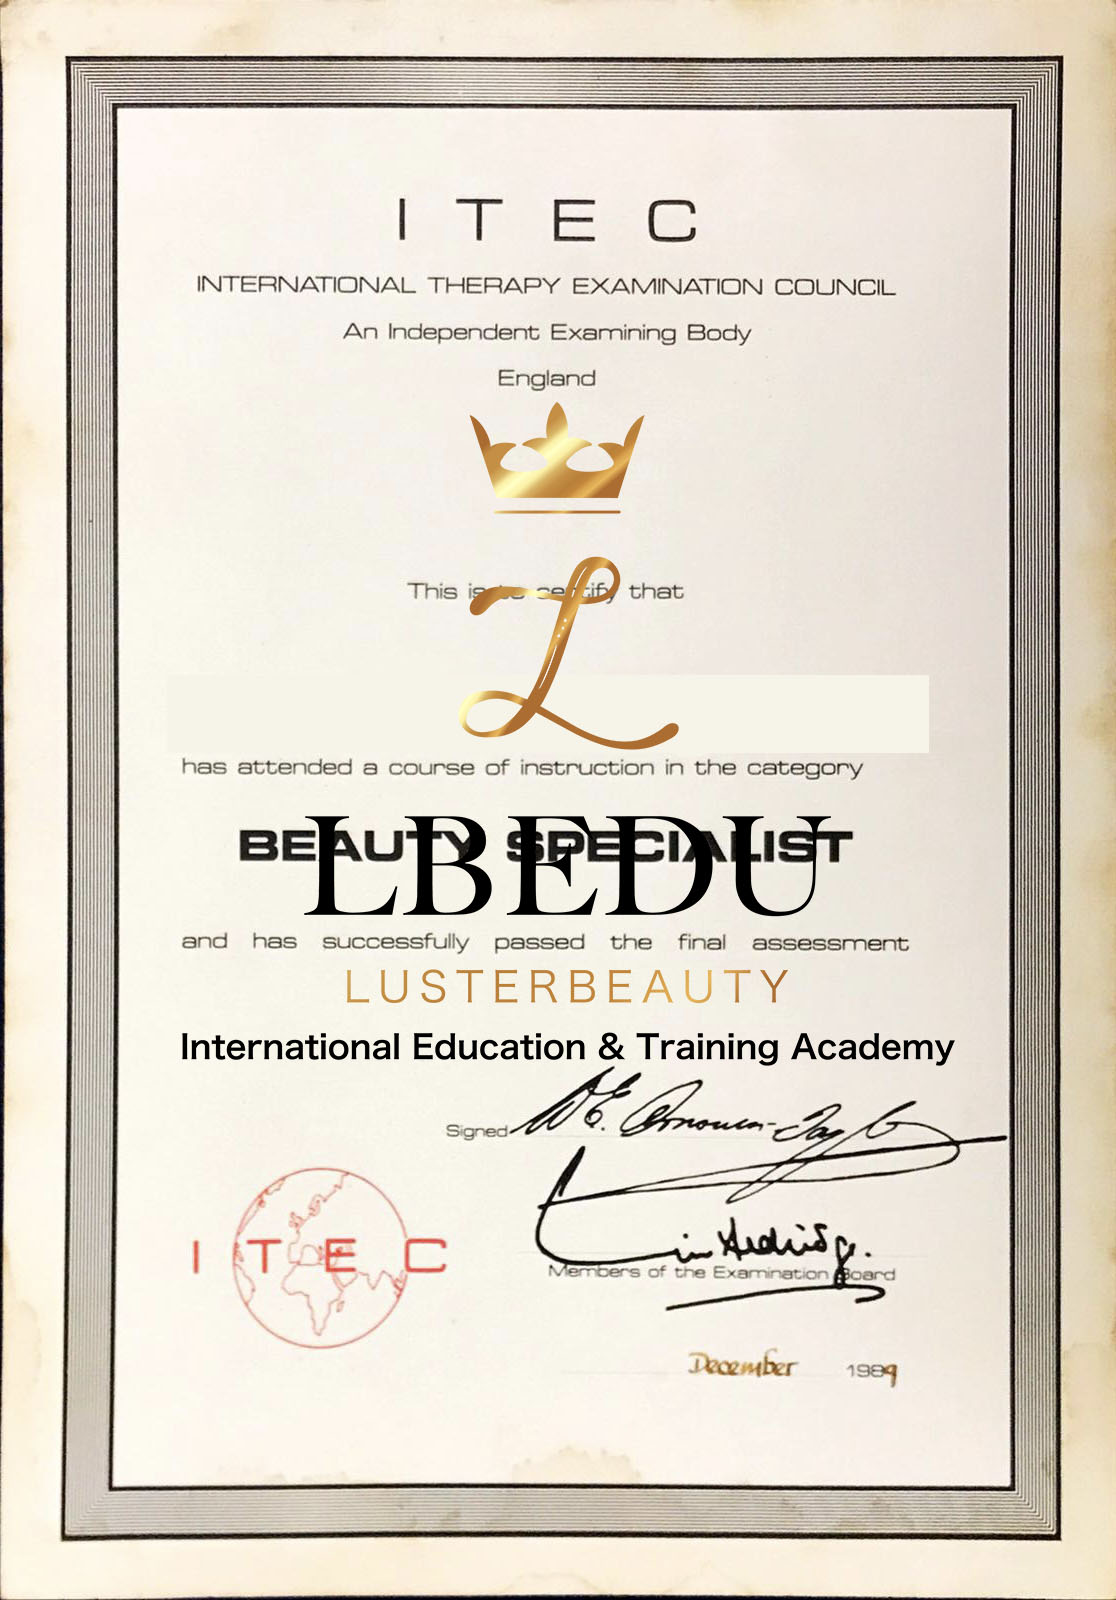 ITEC International Therapy Examination Counicl An Independent Examining Body Since 1989 - Beauty Therapy Qualifications History -1989年iTEC歷史證書 